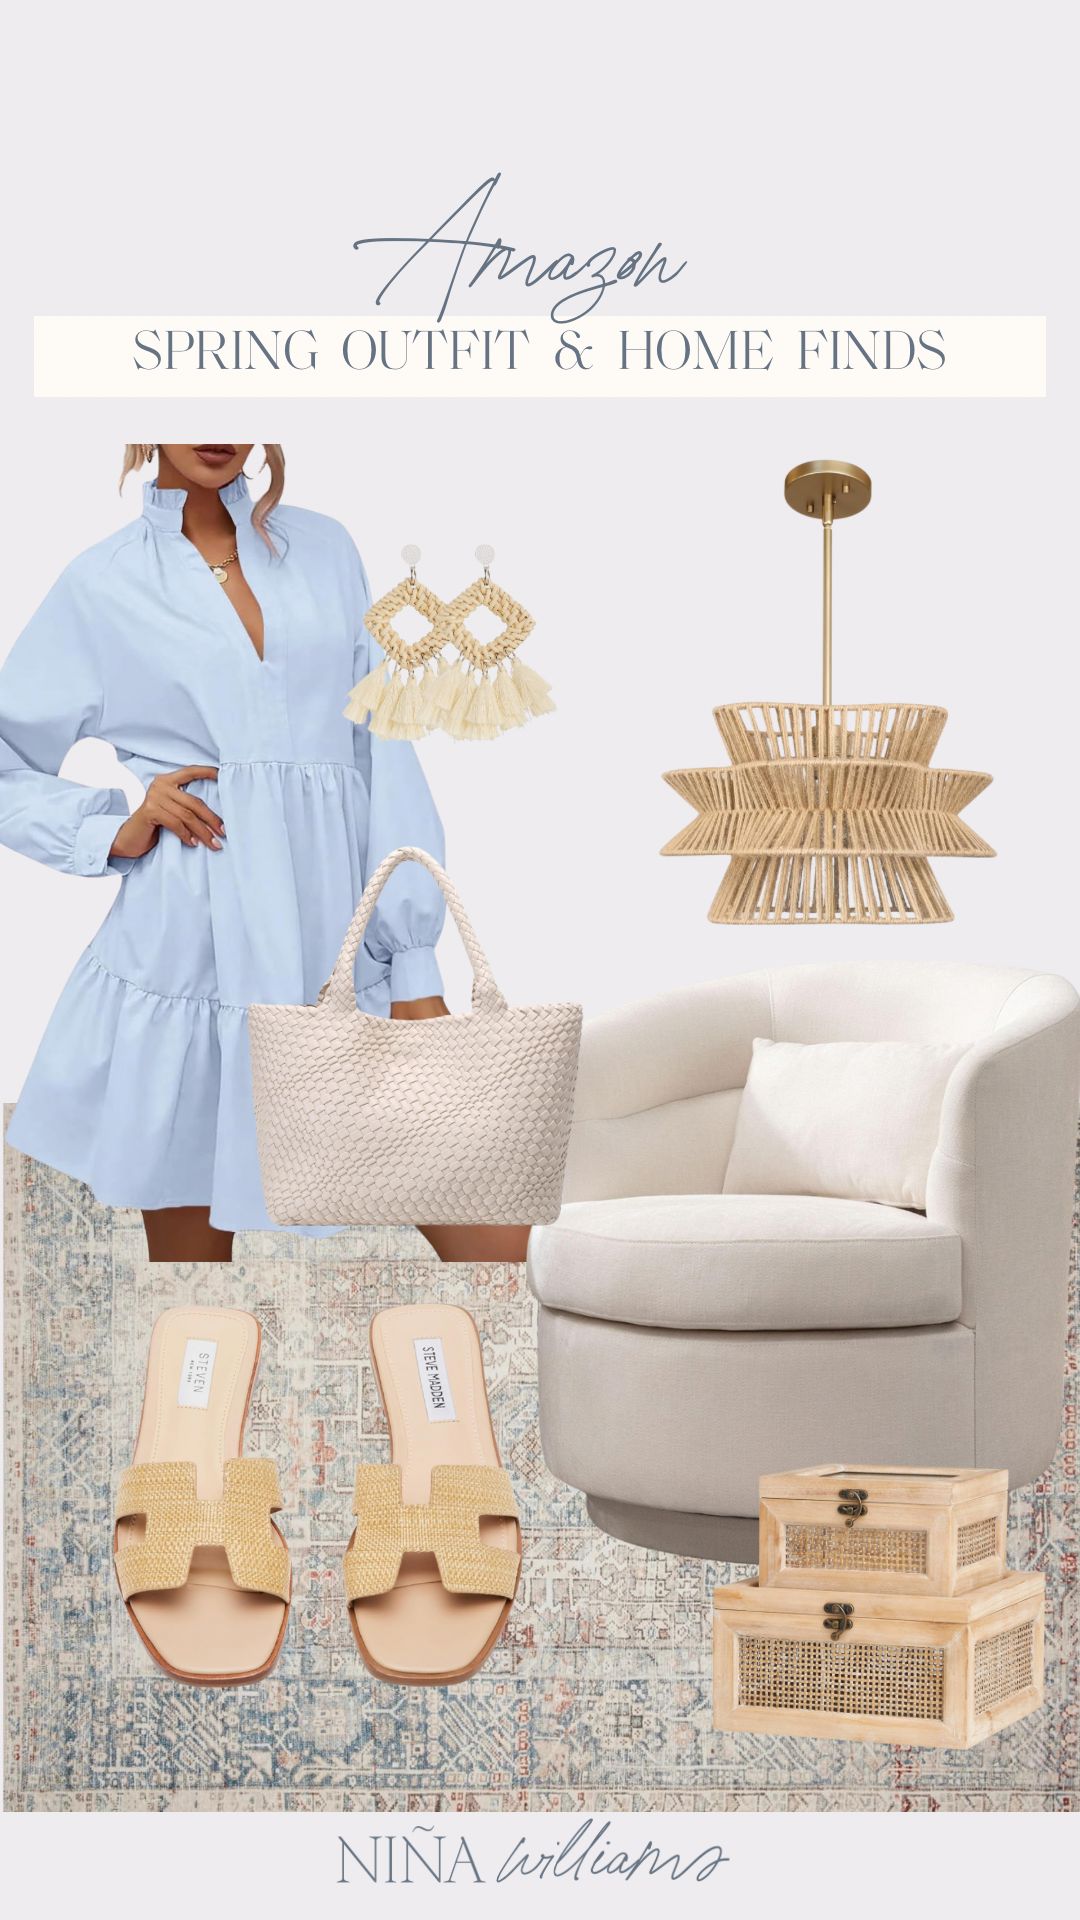 Spring outfit and decor | Amazon (US)